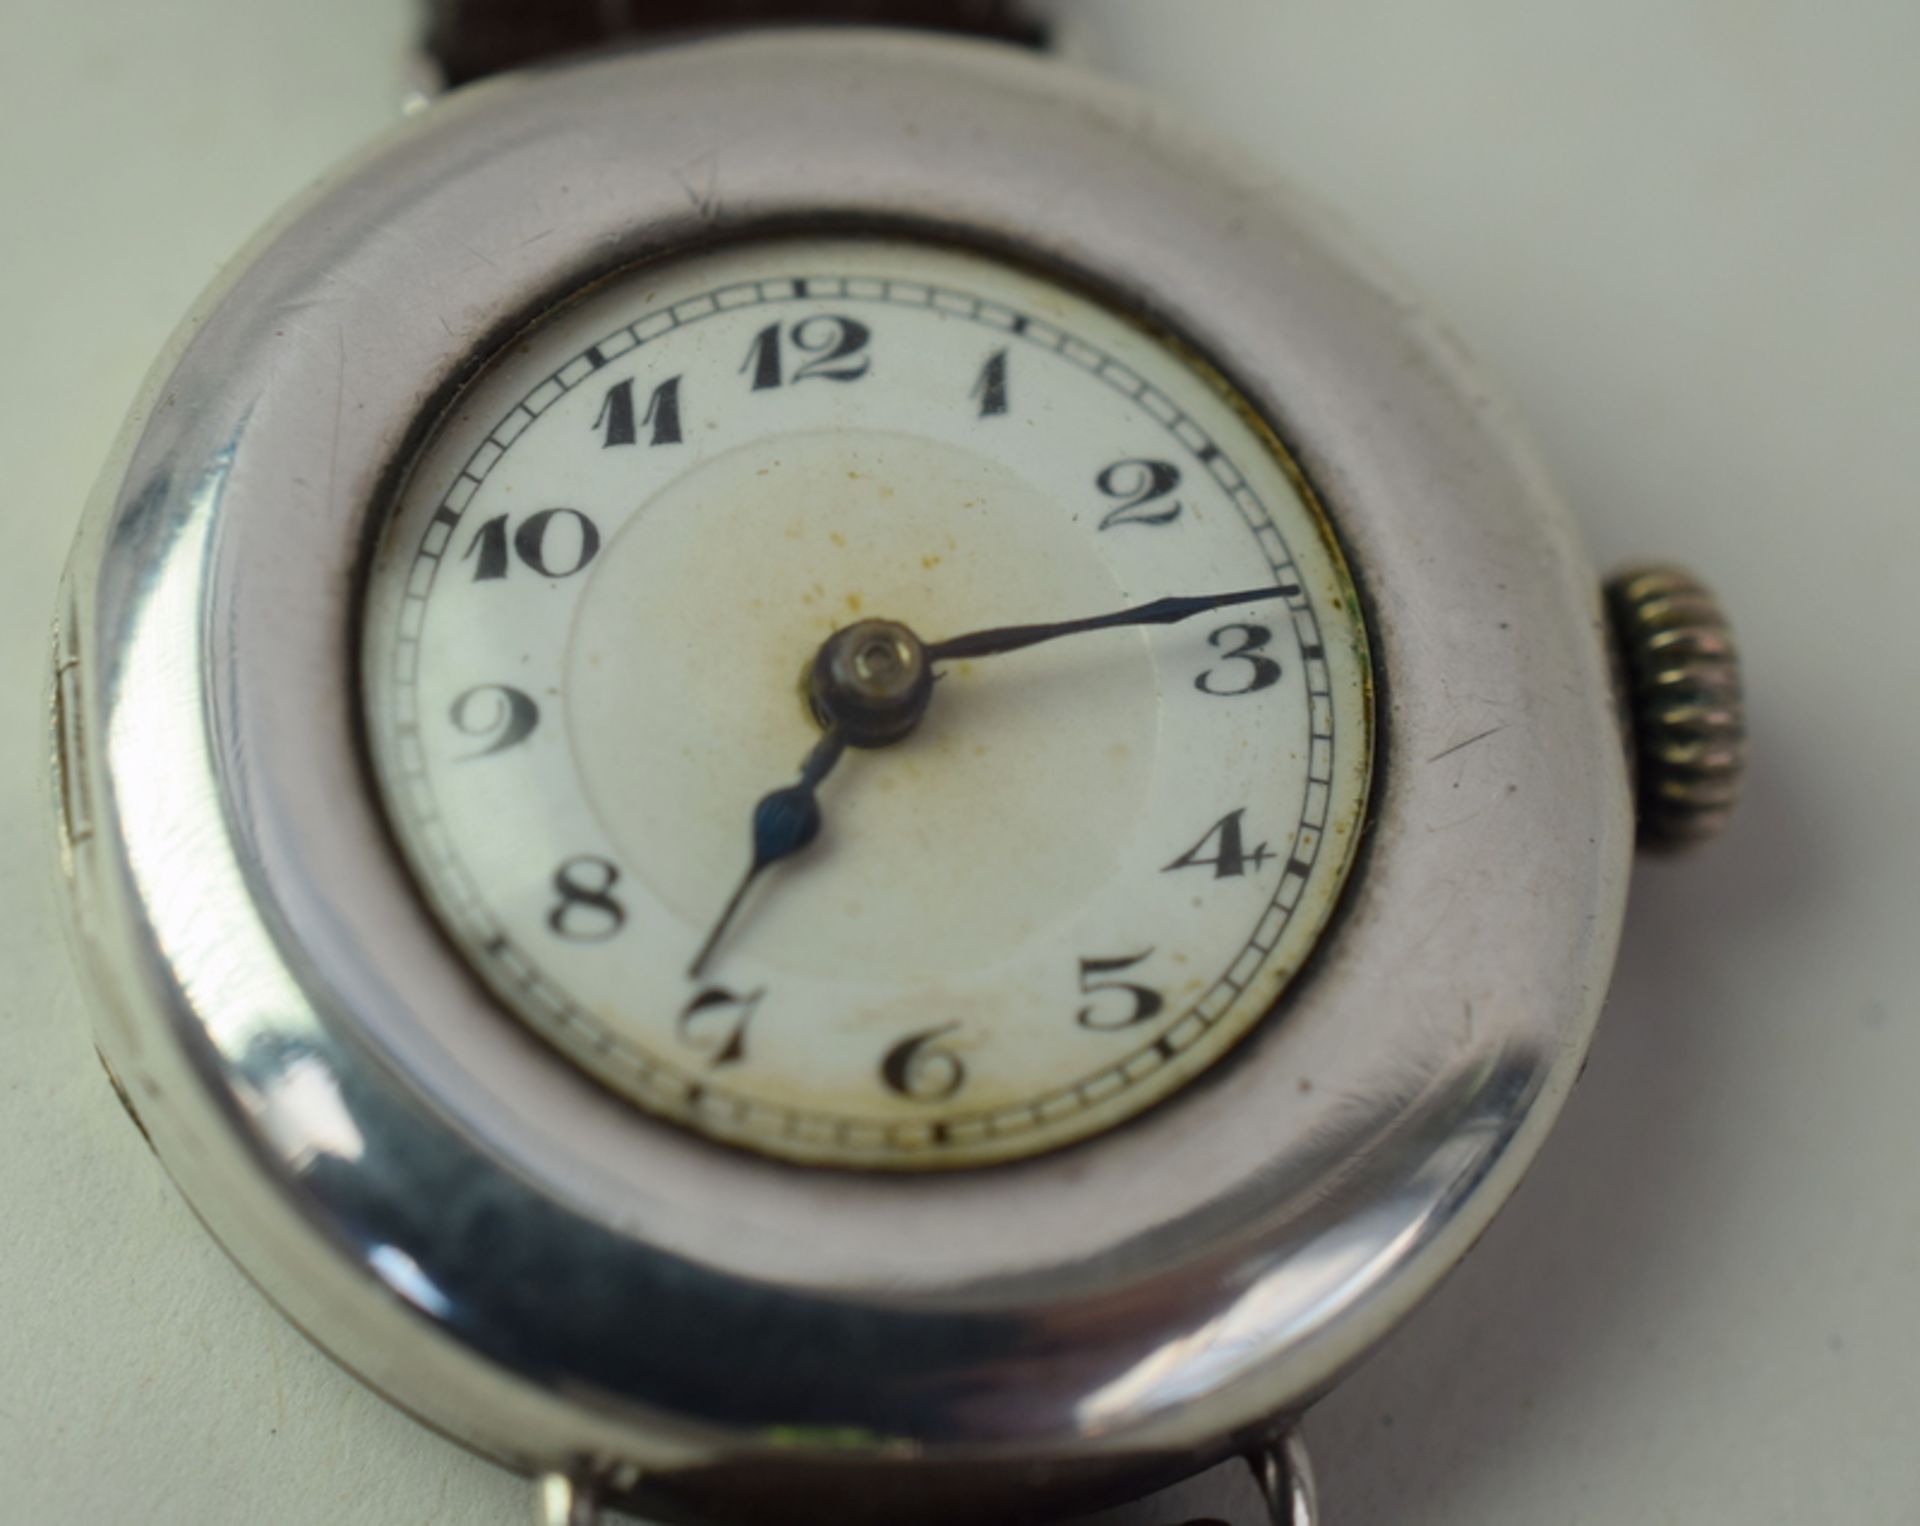 Lady's Silver Trench Watch c1920/30s - Image 4 of 7